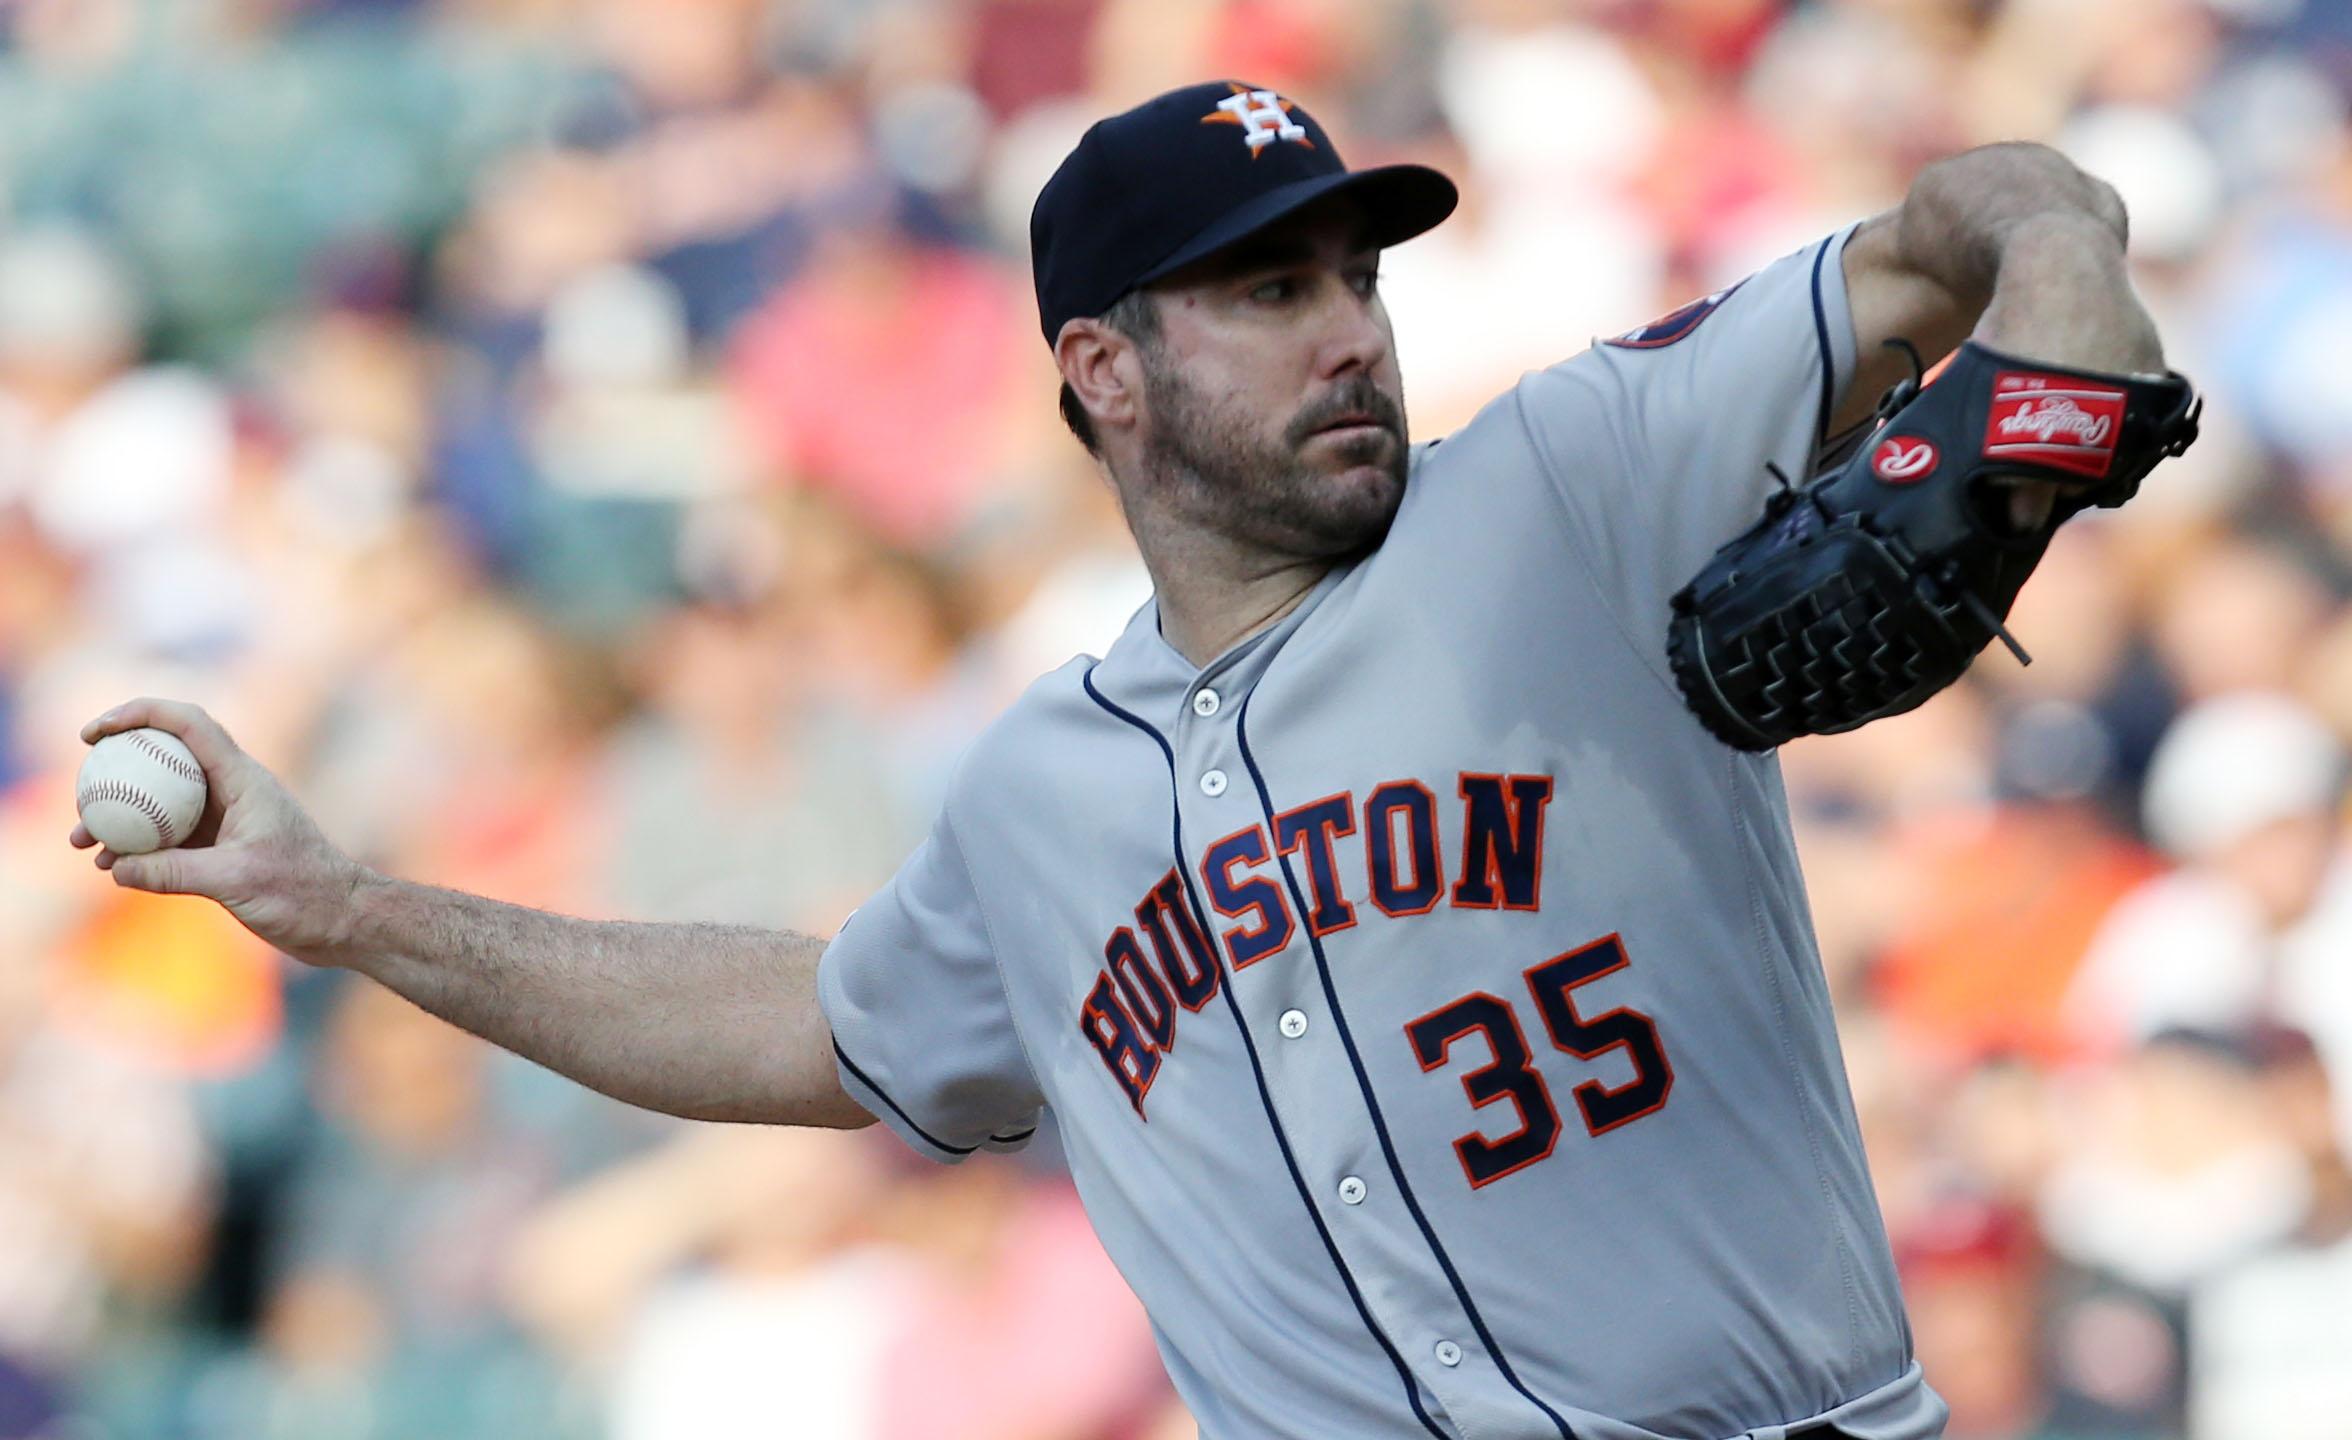 A reporter from the Detroit Free Press was denied access to the Houston Astros clubhouse and pitcher Justin Verlander following Wednesdays loss to the Detroit Tigers.